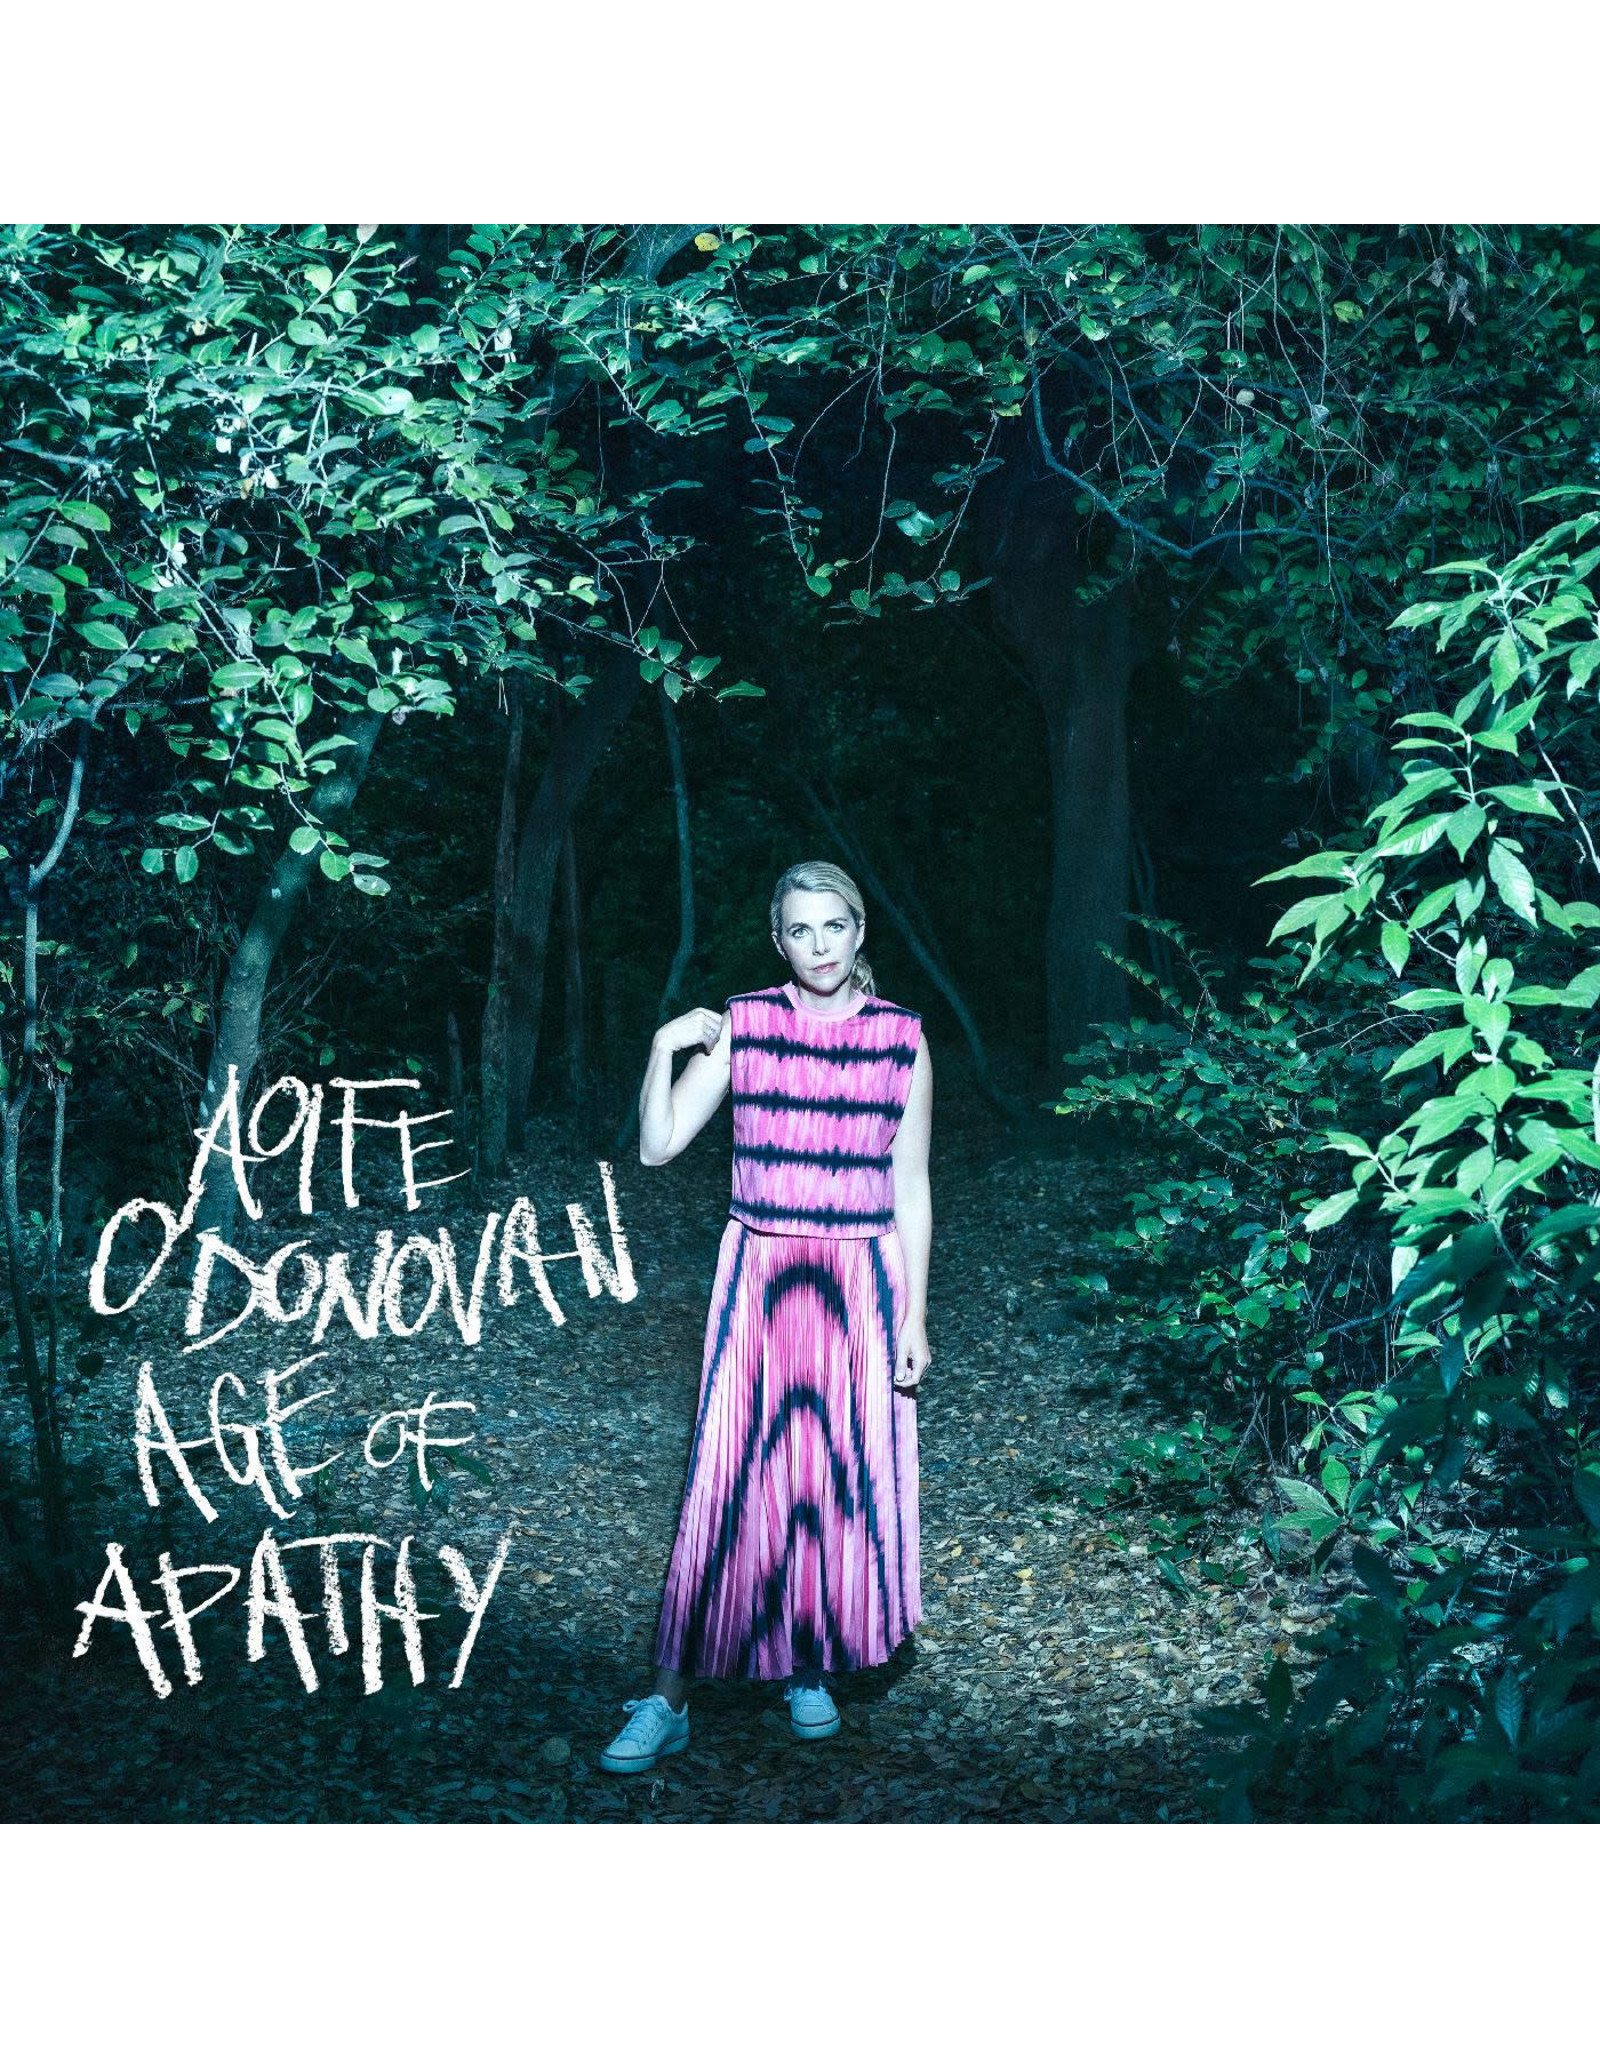 New Vinyl Aoife O'Donovan - Age of Apathy (Colored) LP